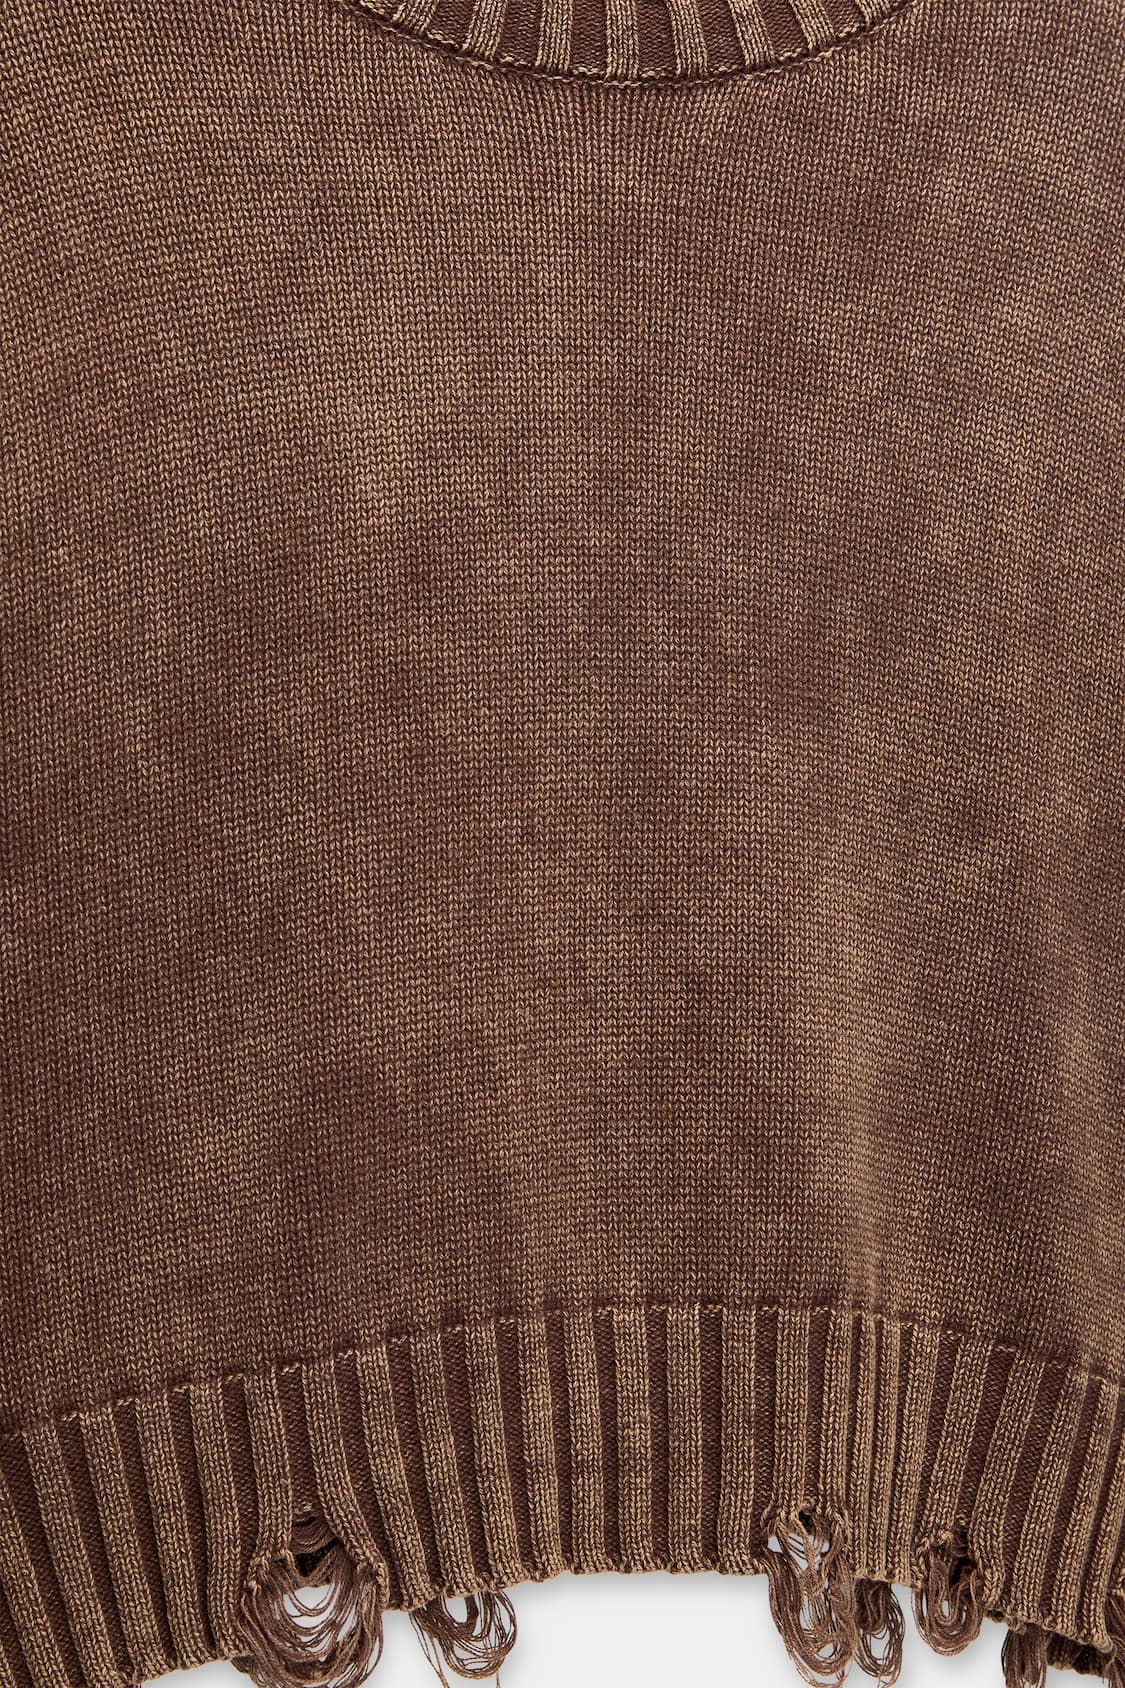 RIPPED RIBBED SWEATER - Brown / Taupe